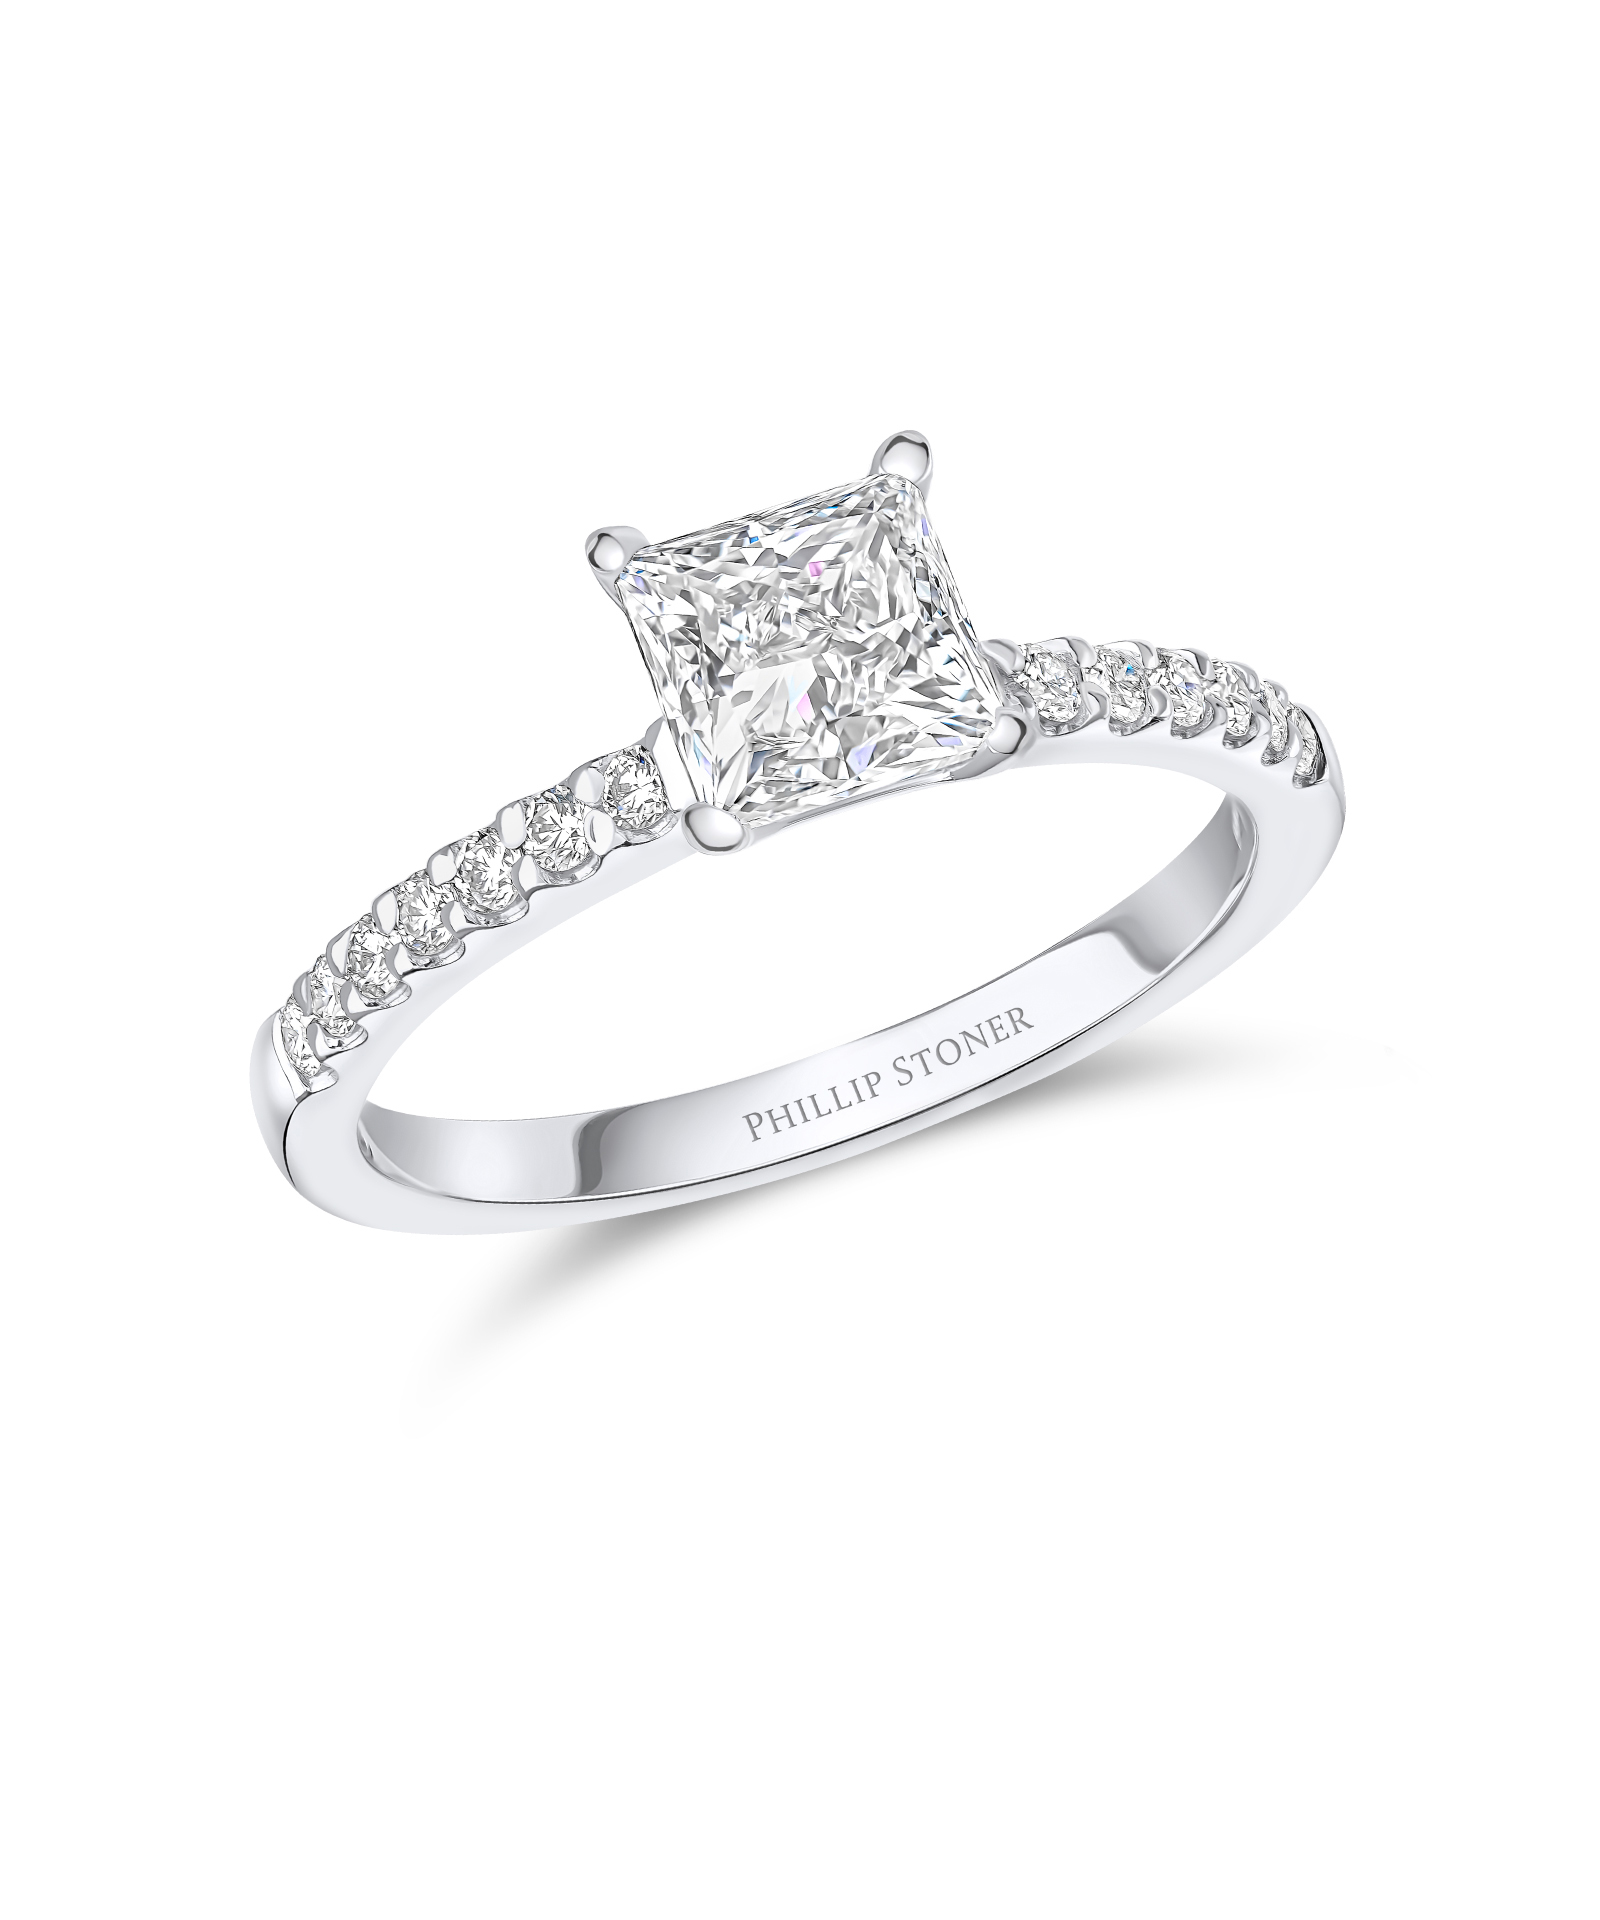 1ct Princess Diamond Ring with Scallop Set Shoulders - Phillip Stoner The Jeweller